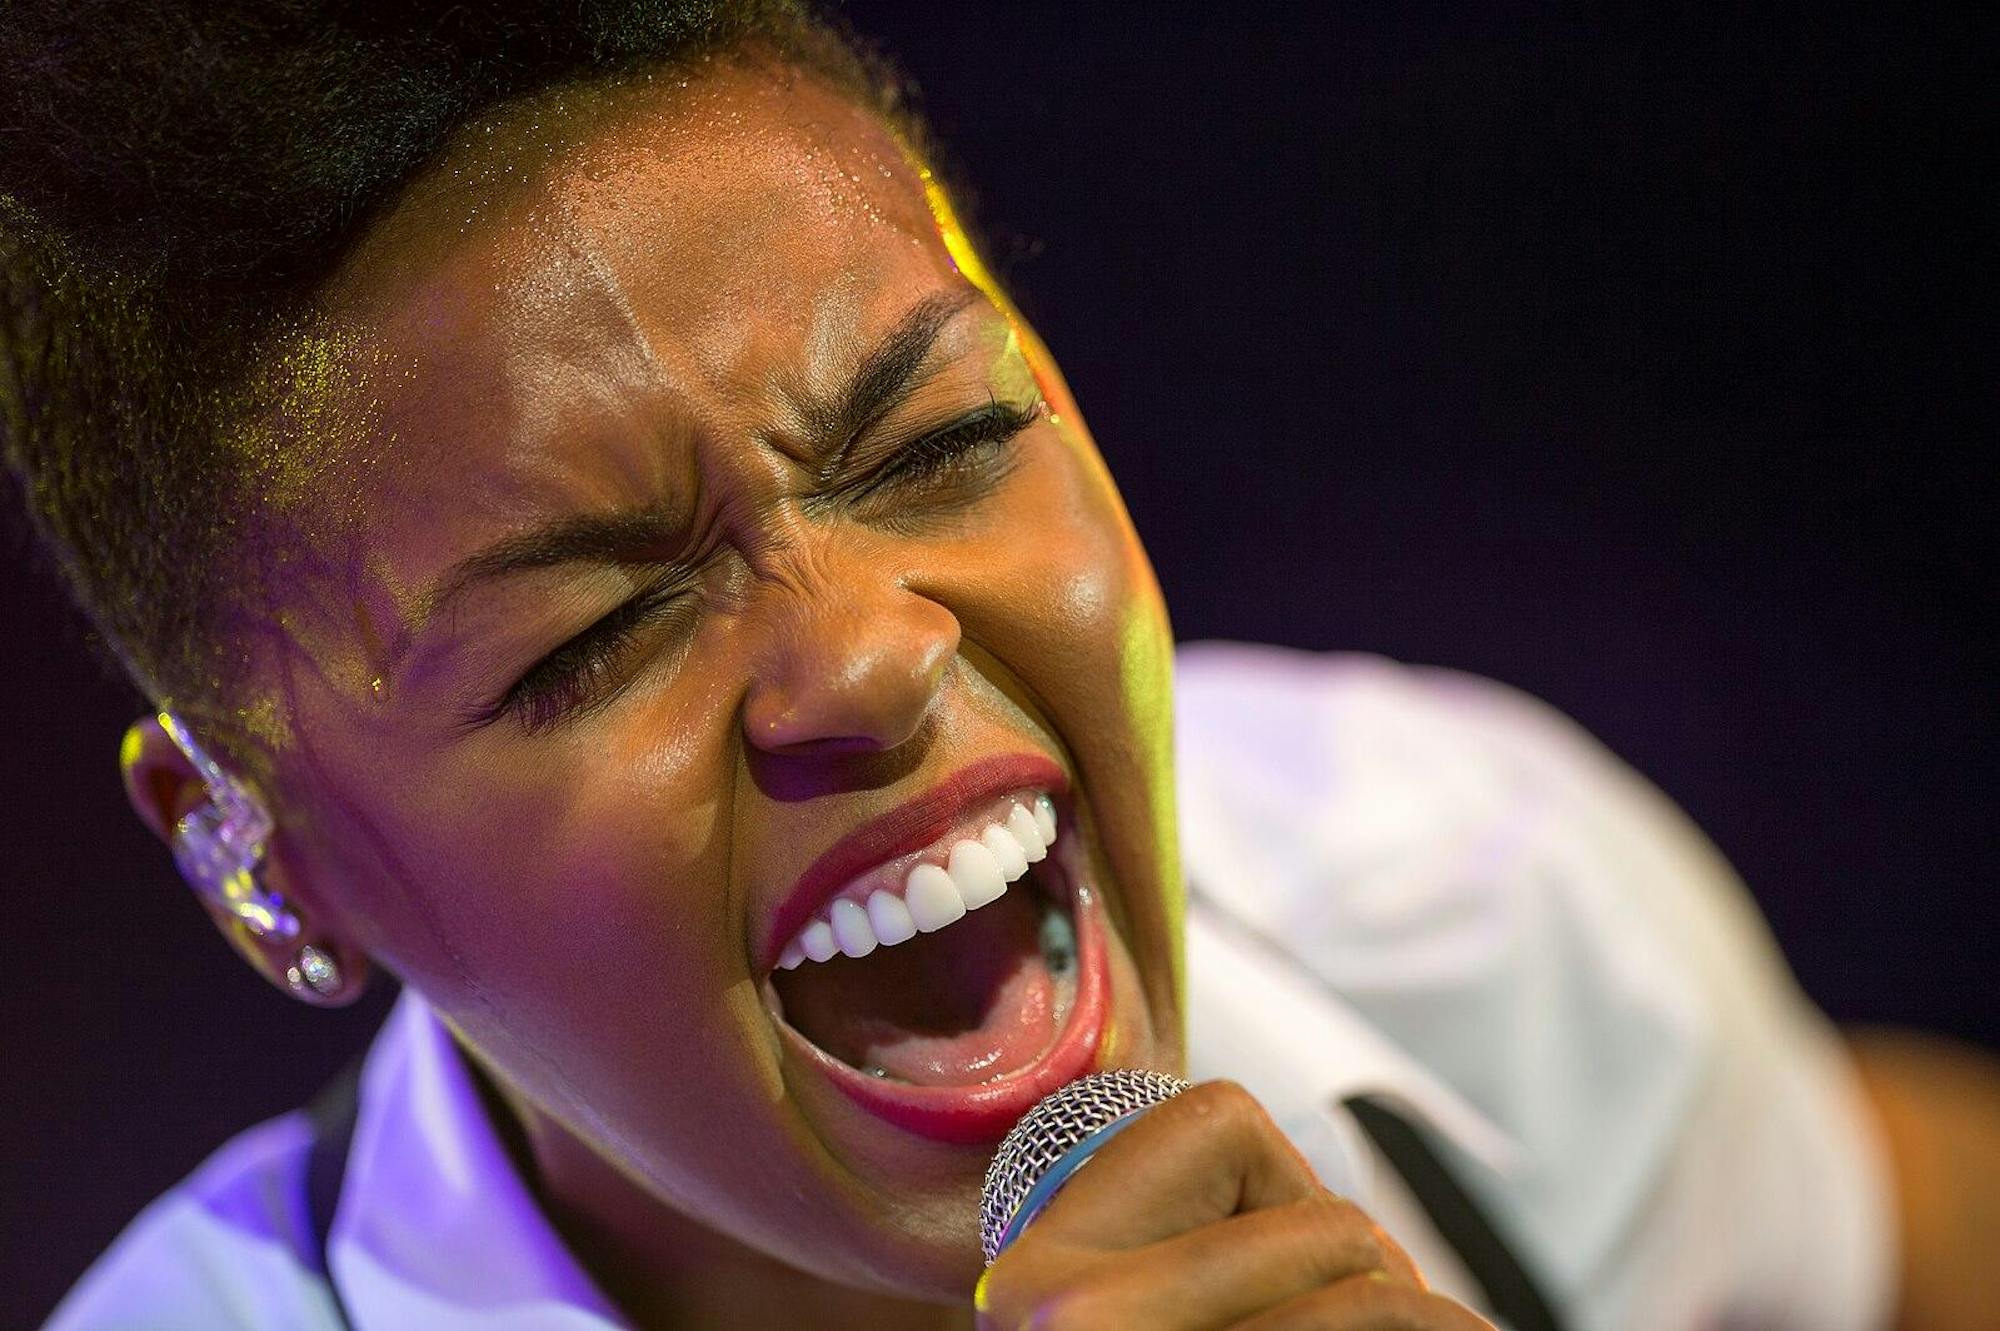 Janelle Monáe is pictured performing at the Roskilde Festival in 2012.